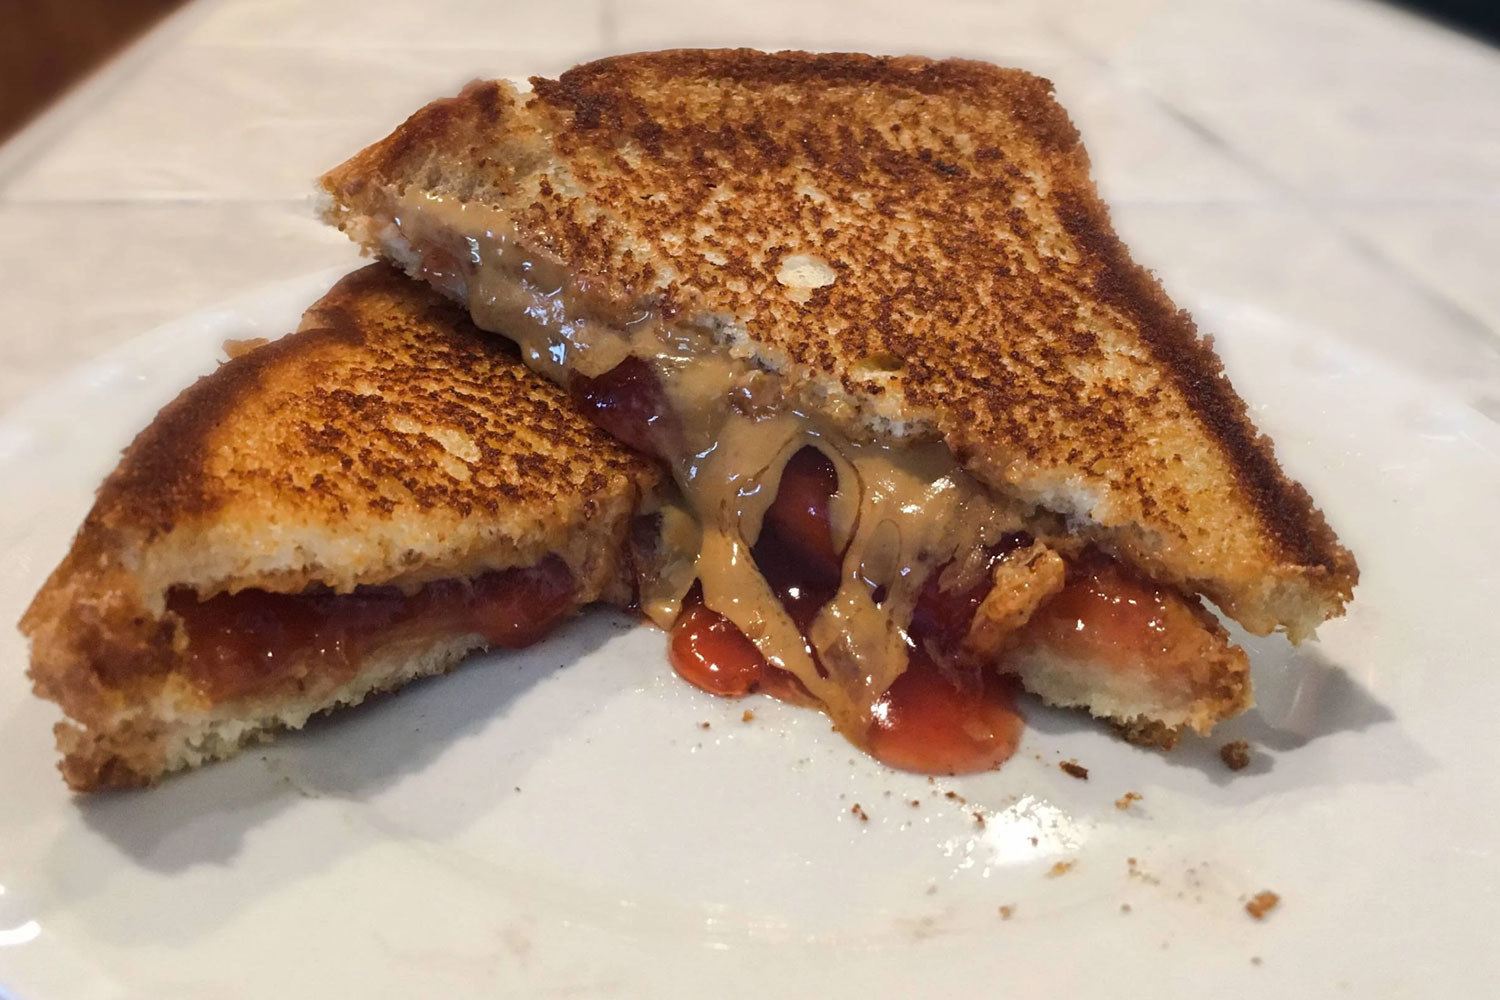 A grilled peanut butter and jelly sandwich